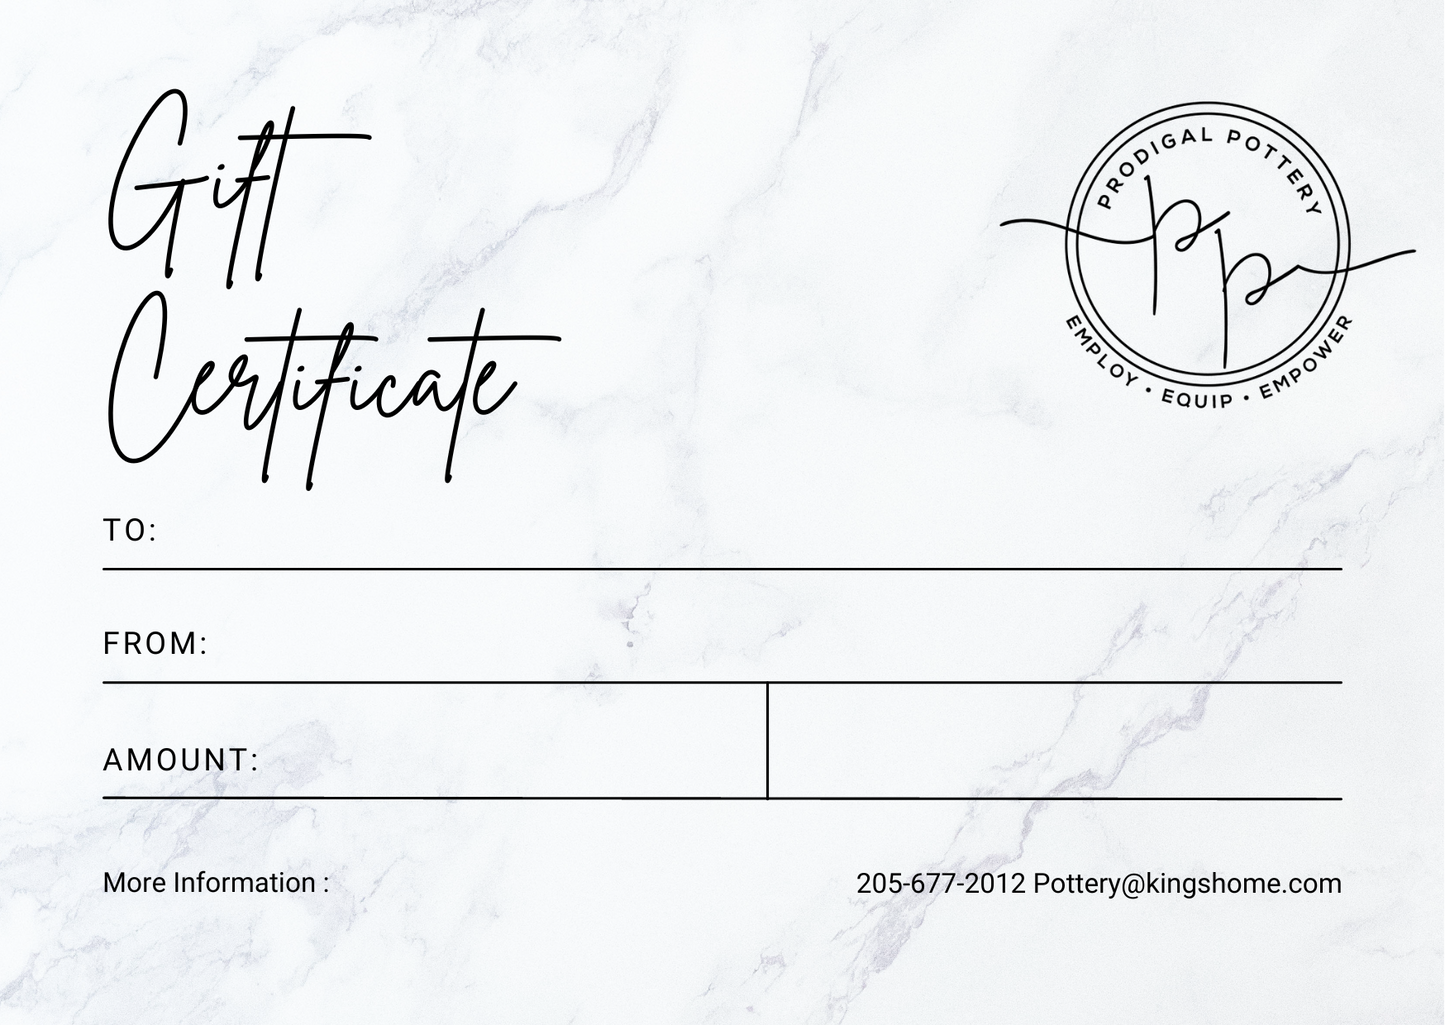 Prodigal Pottery Gift Certificate